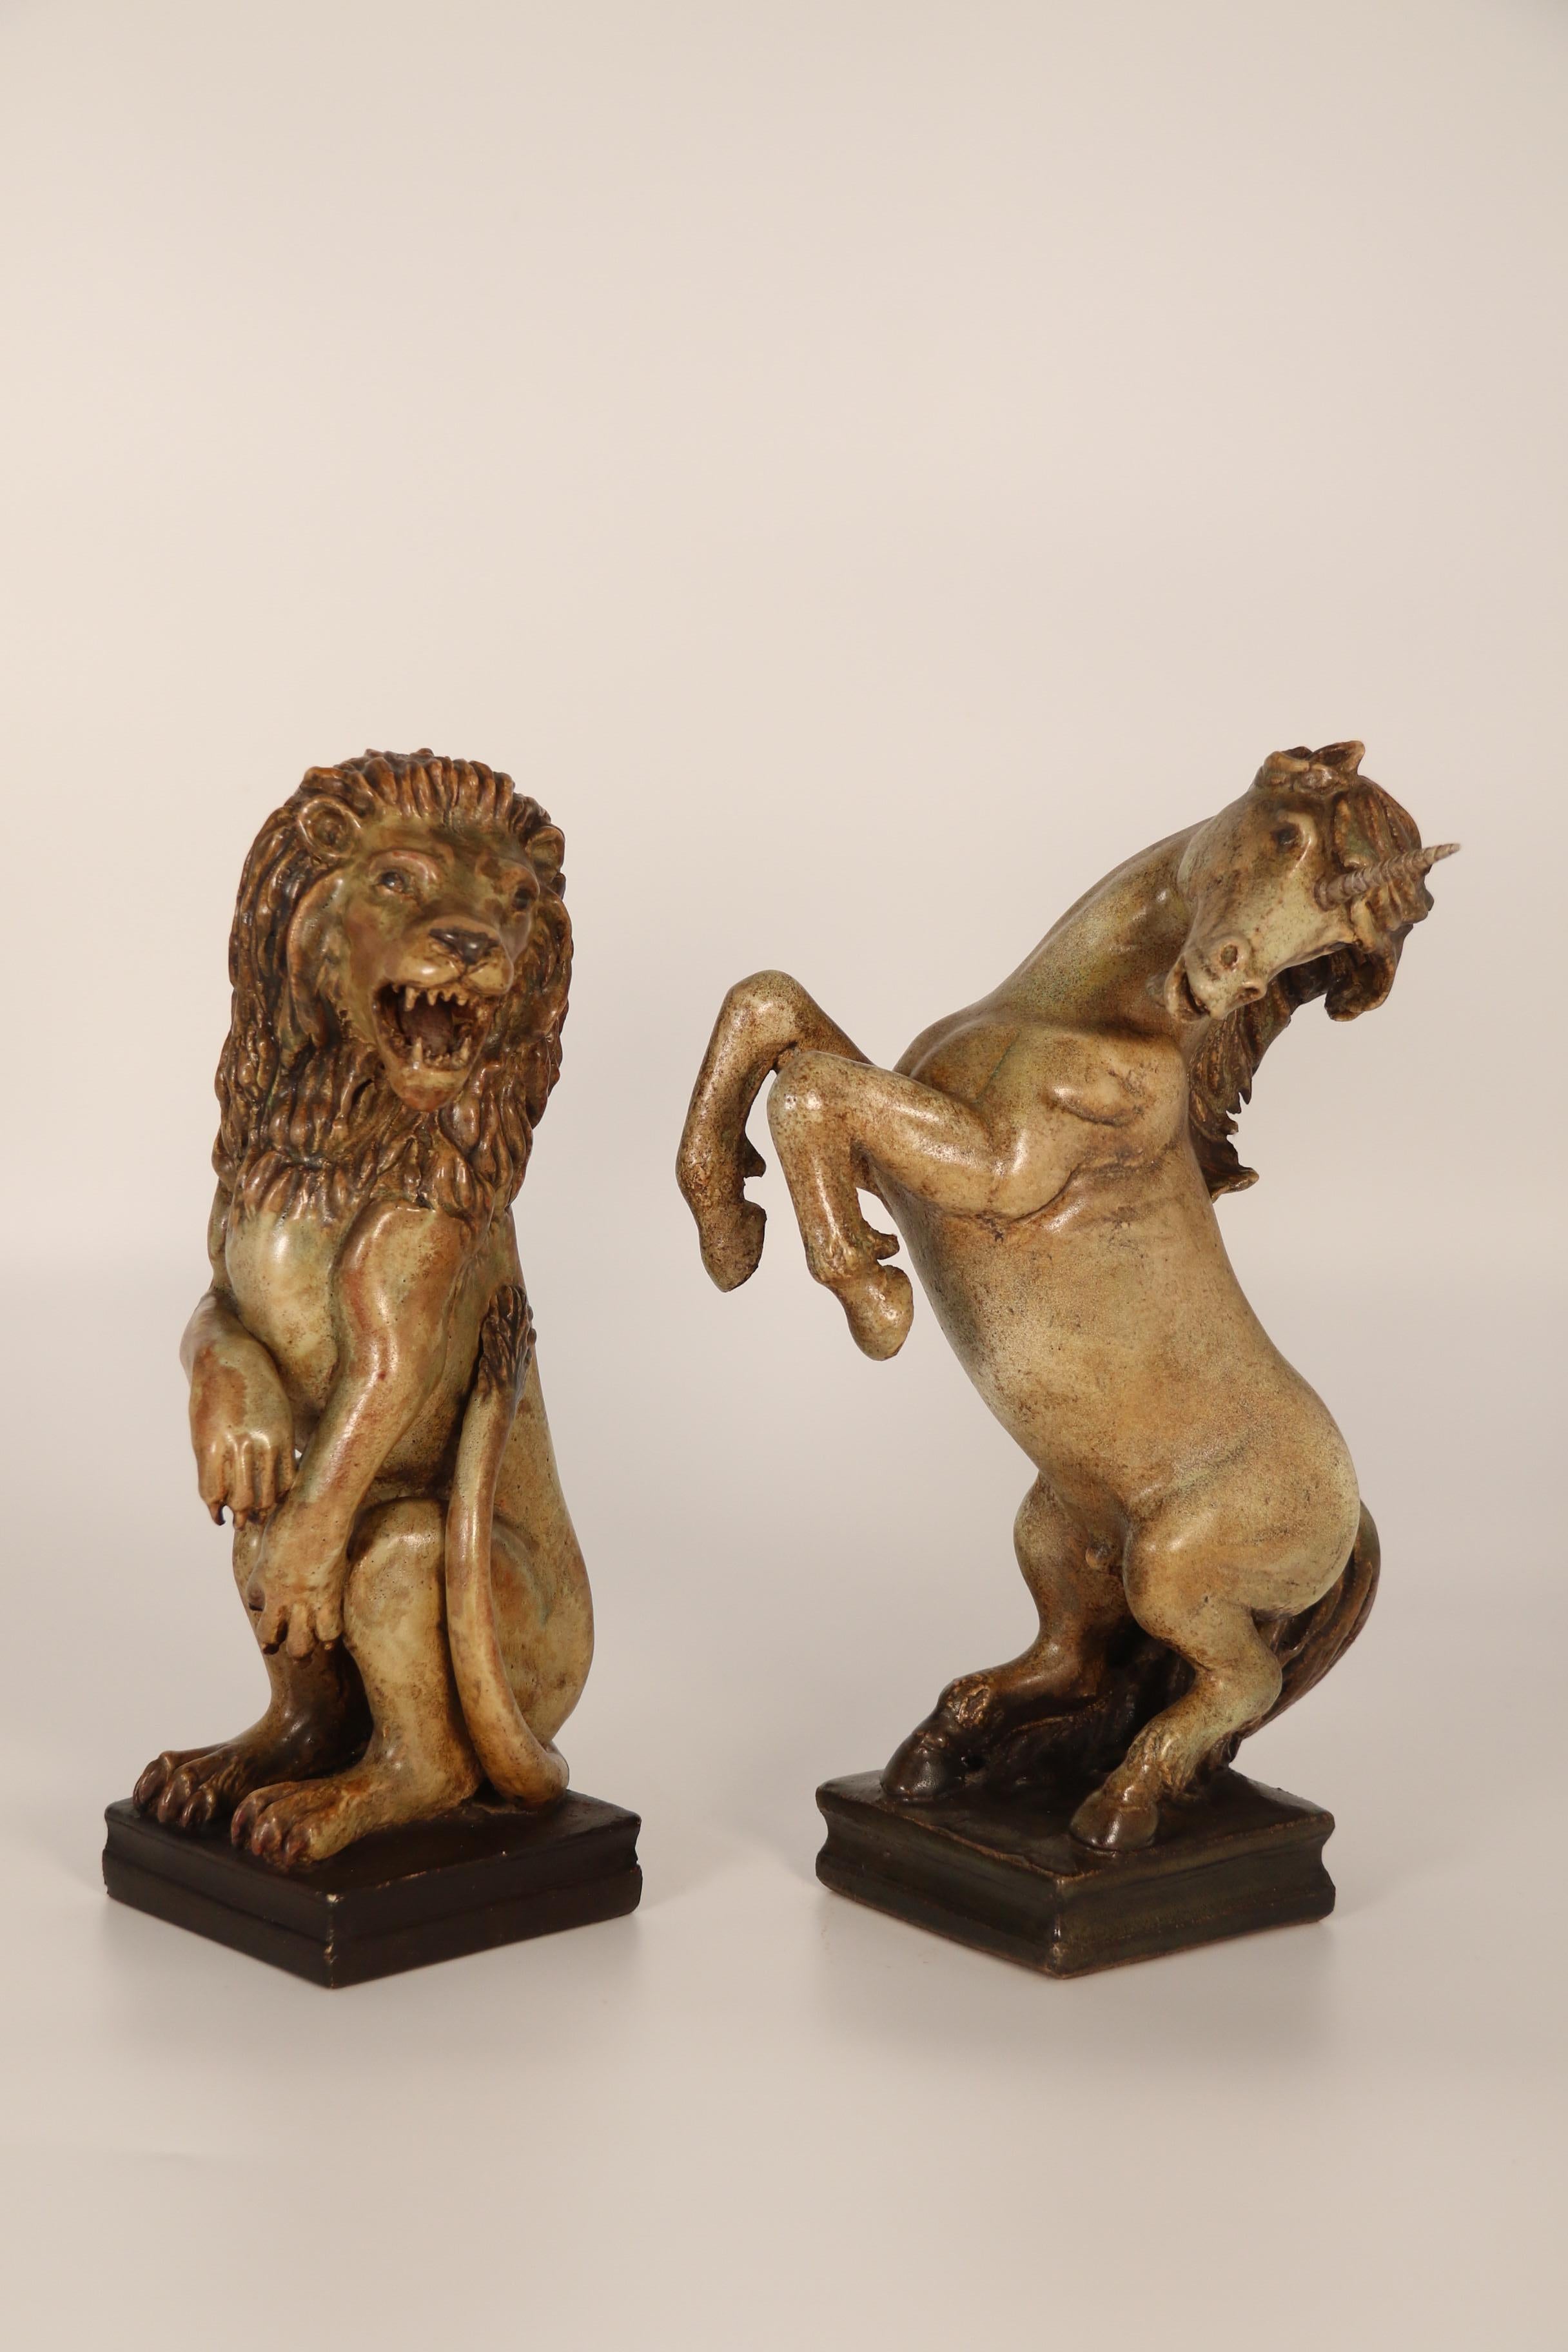 Pottery A pair of art pottery hand sculpted figures of a heraldic lion and unicorn. For Sale